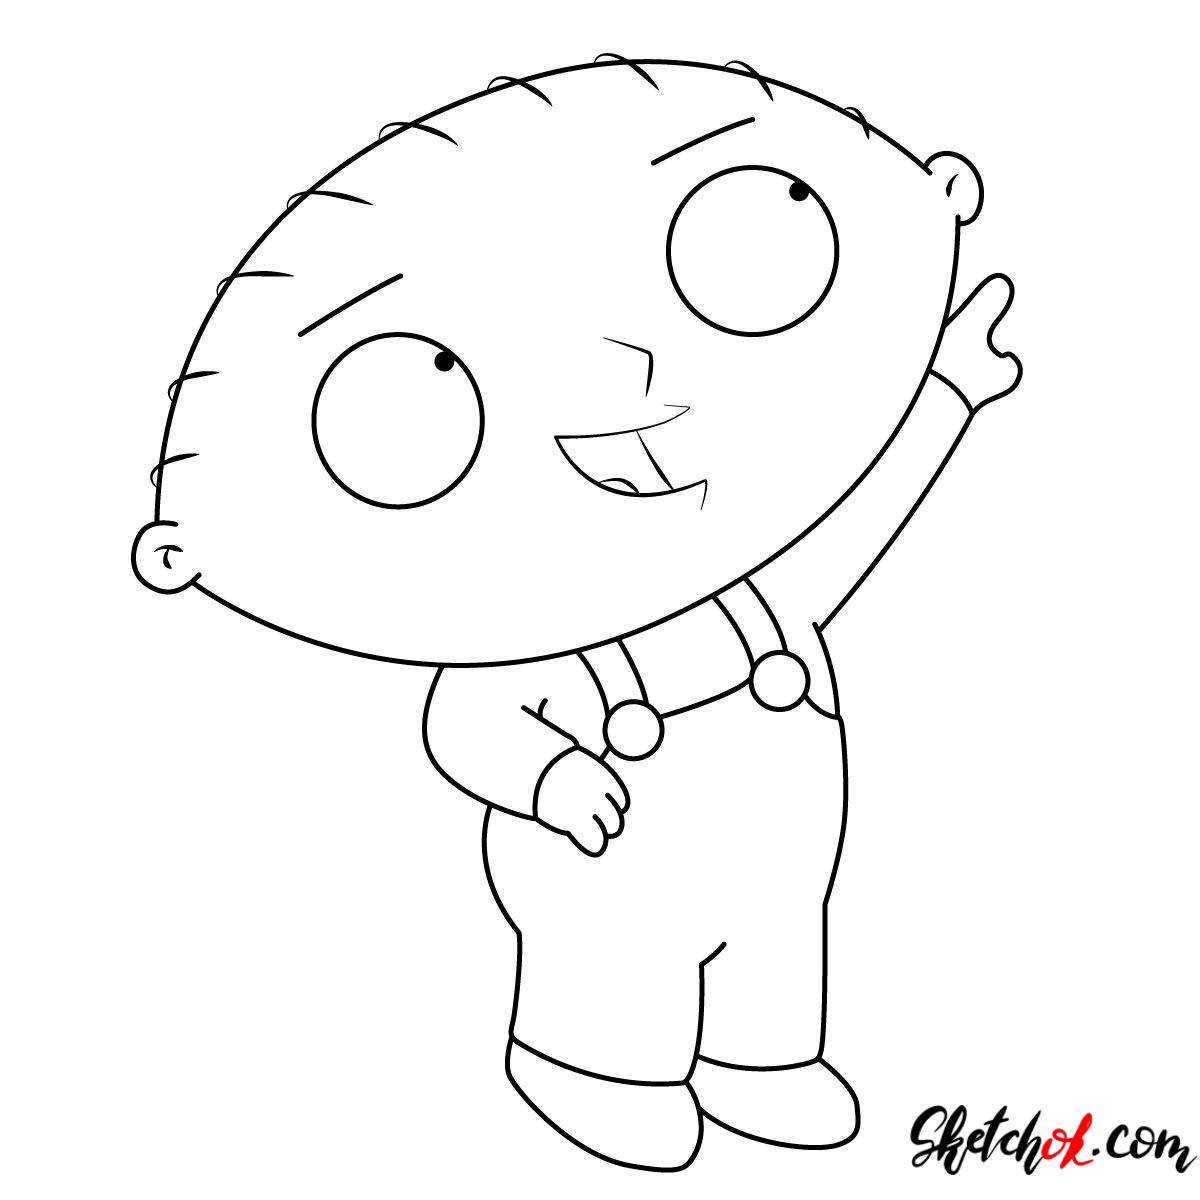 How To Draw Stewie Griffin From Family Guy Really Eas - vrogue.co